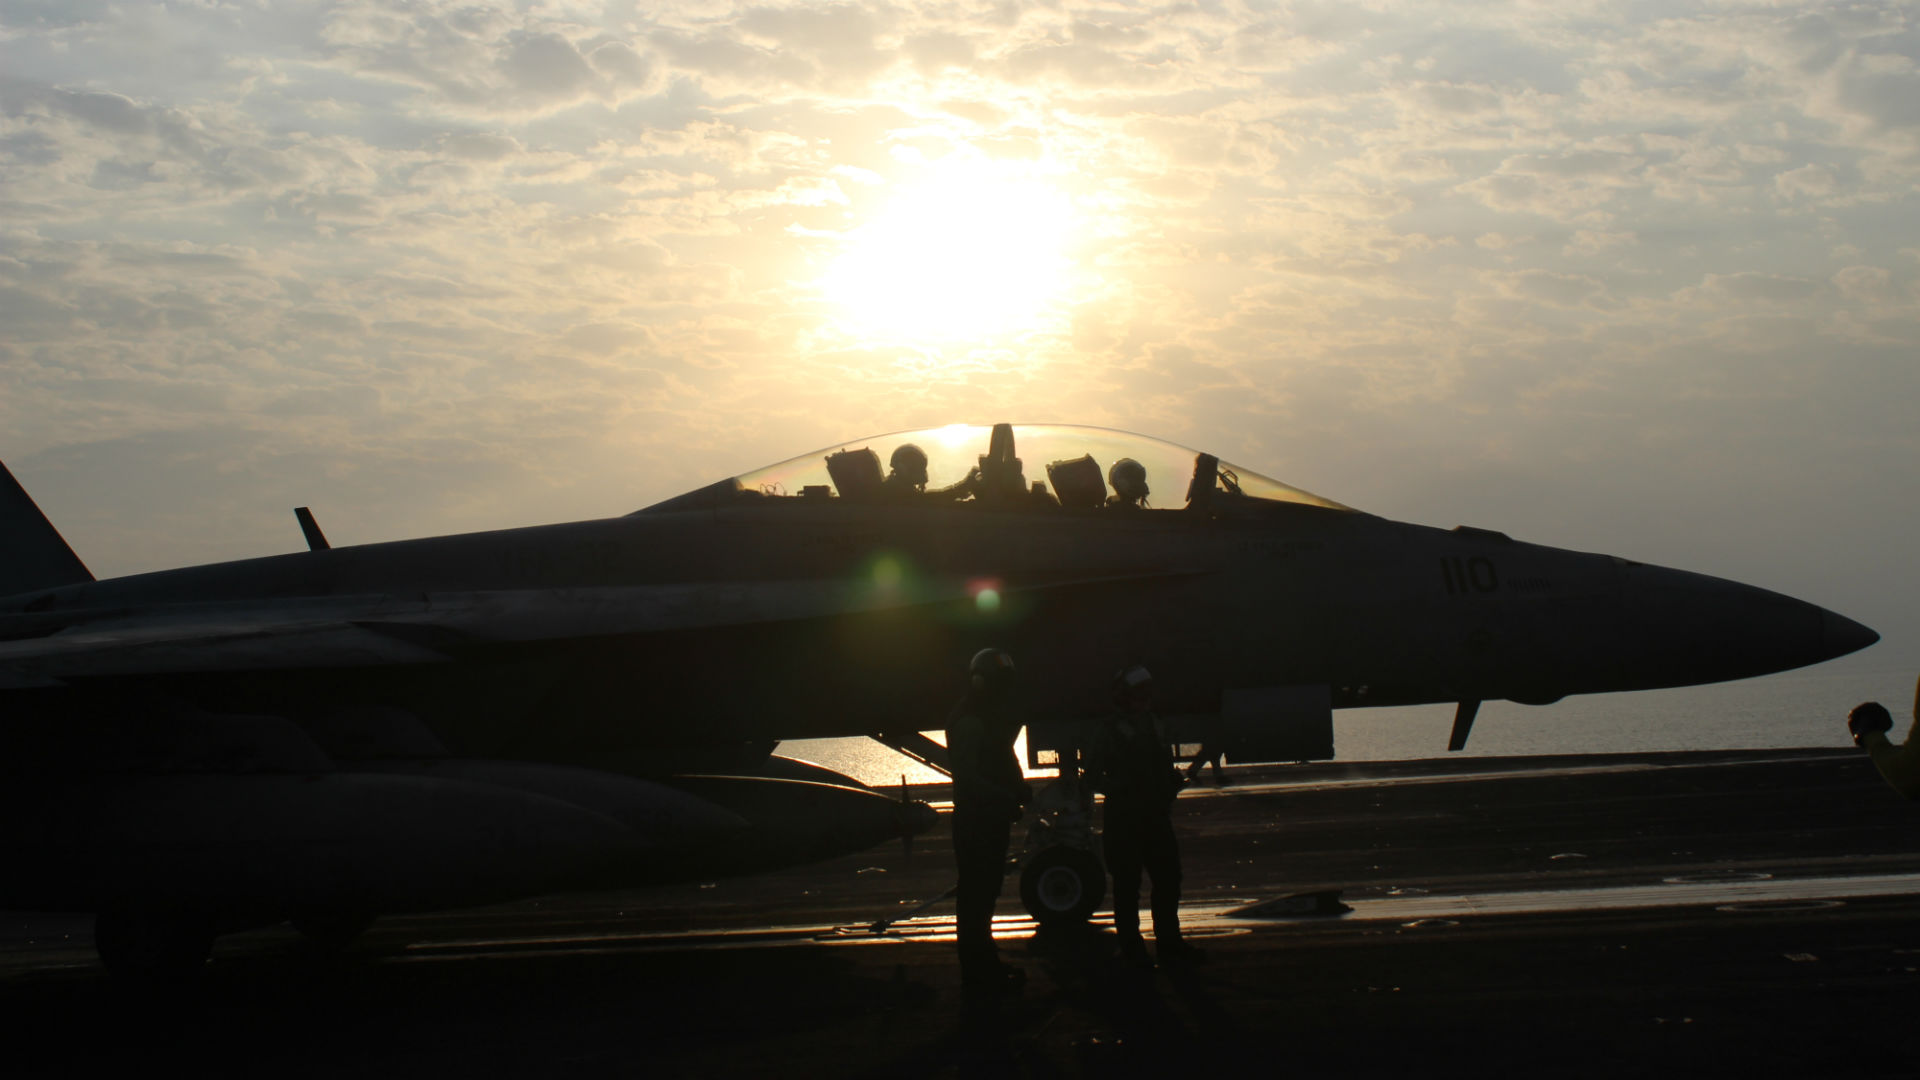 Life aboard the aircraft carrier bombing Syria and Iraq